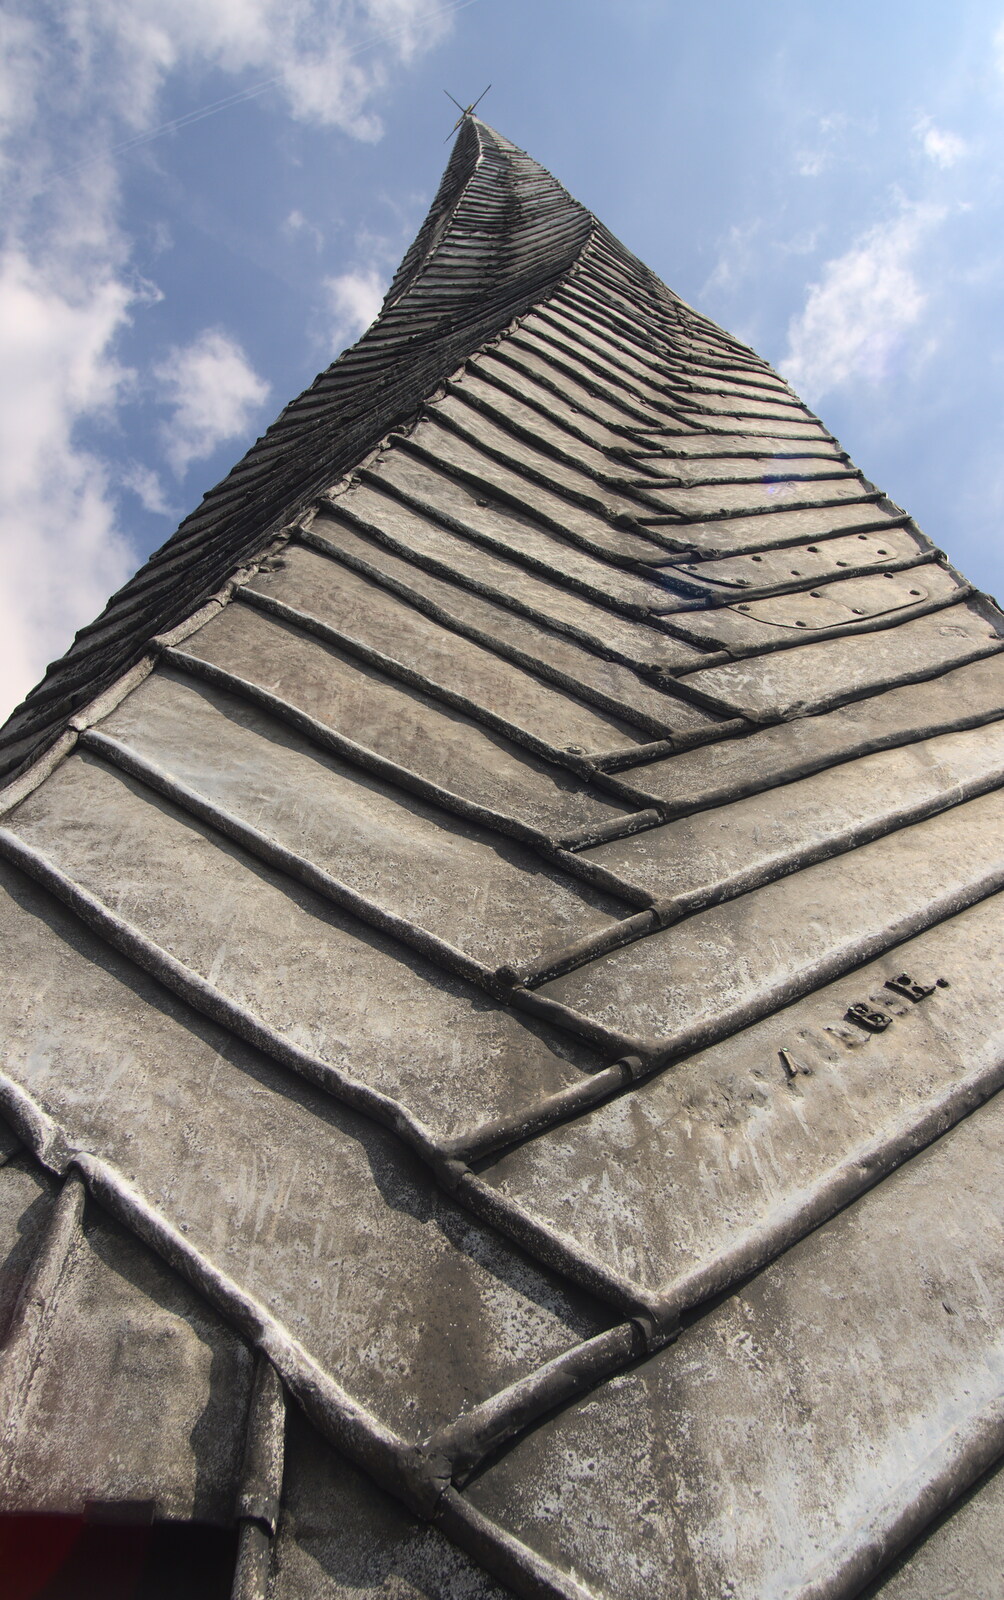 A close-up of the twisty tower from Chesterfield and the Twisty Spire, Derbyshire - 19th April 2013